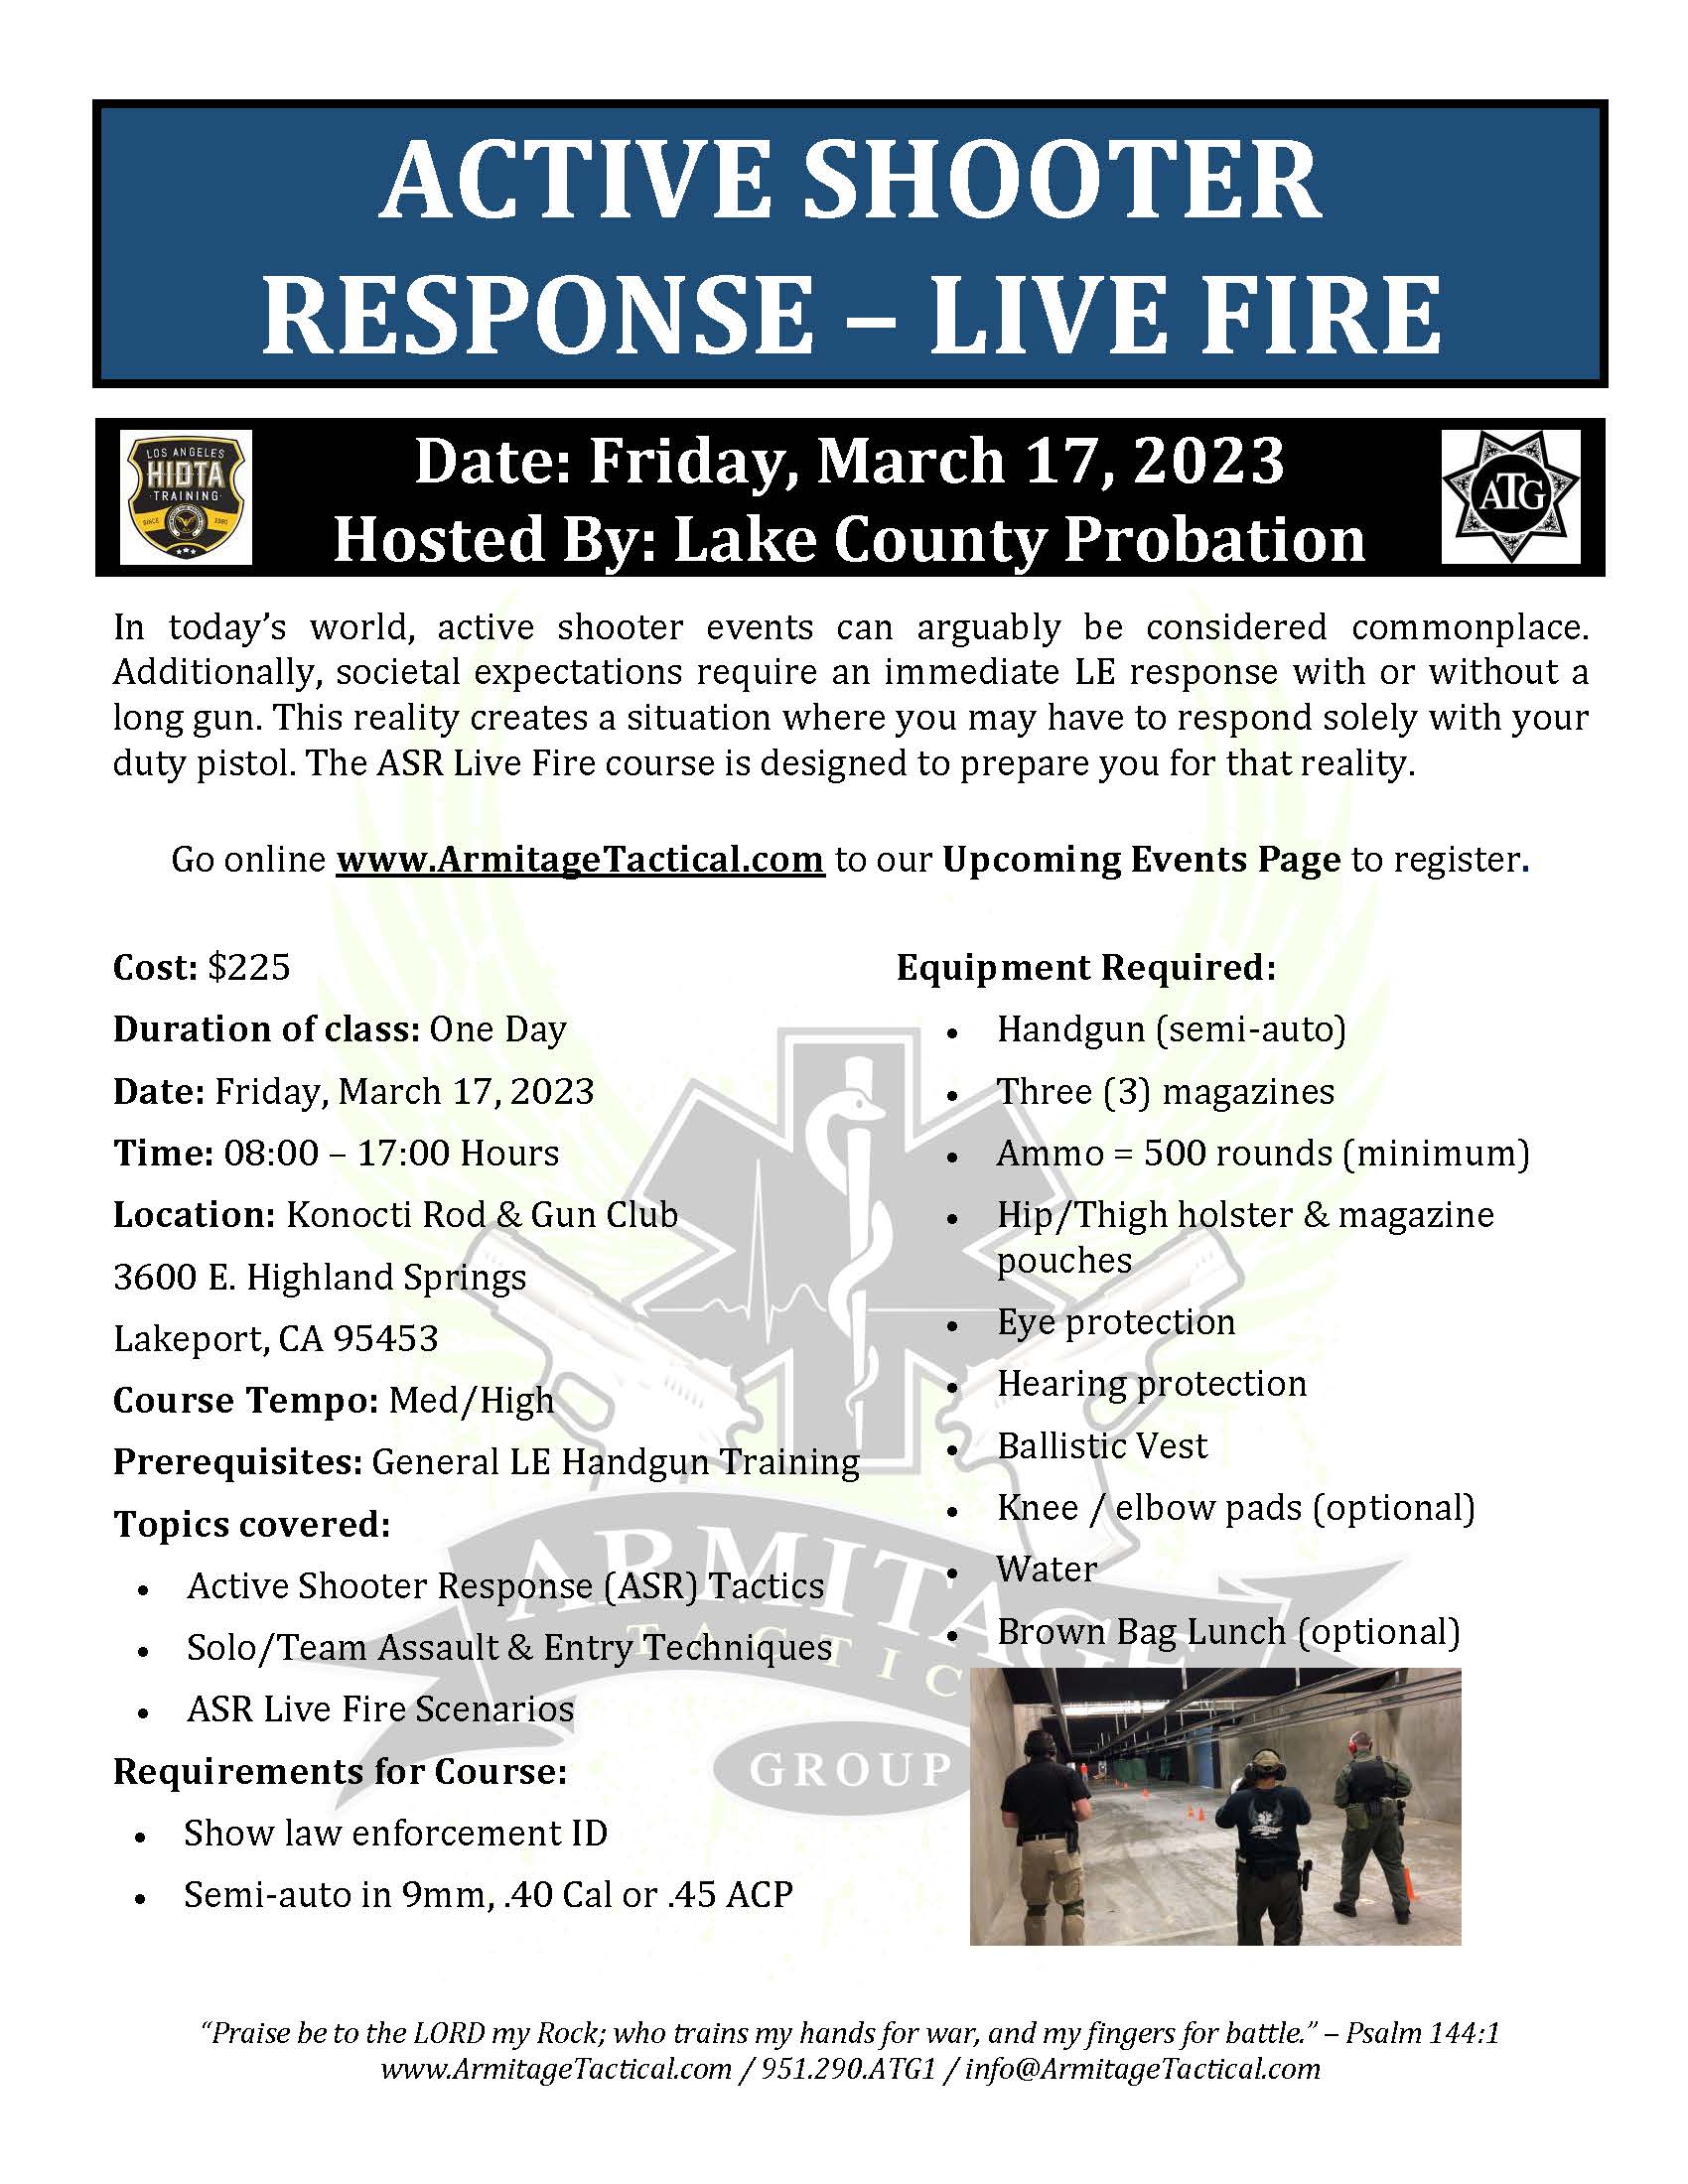 2023/03/17 - Active Shooter Response Live Fire - Lakeport, CA